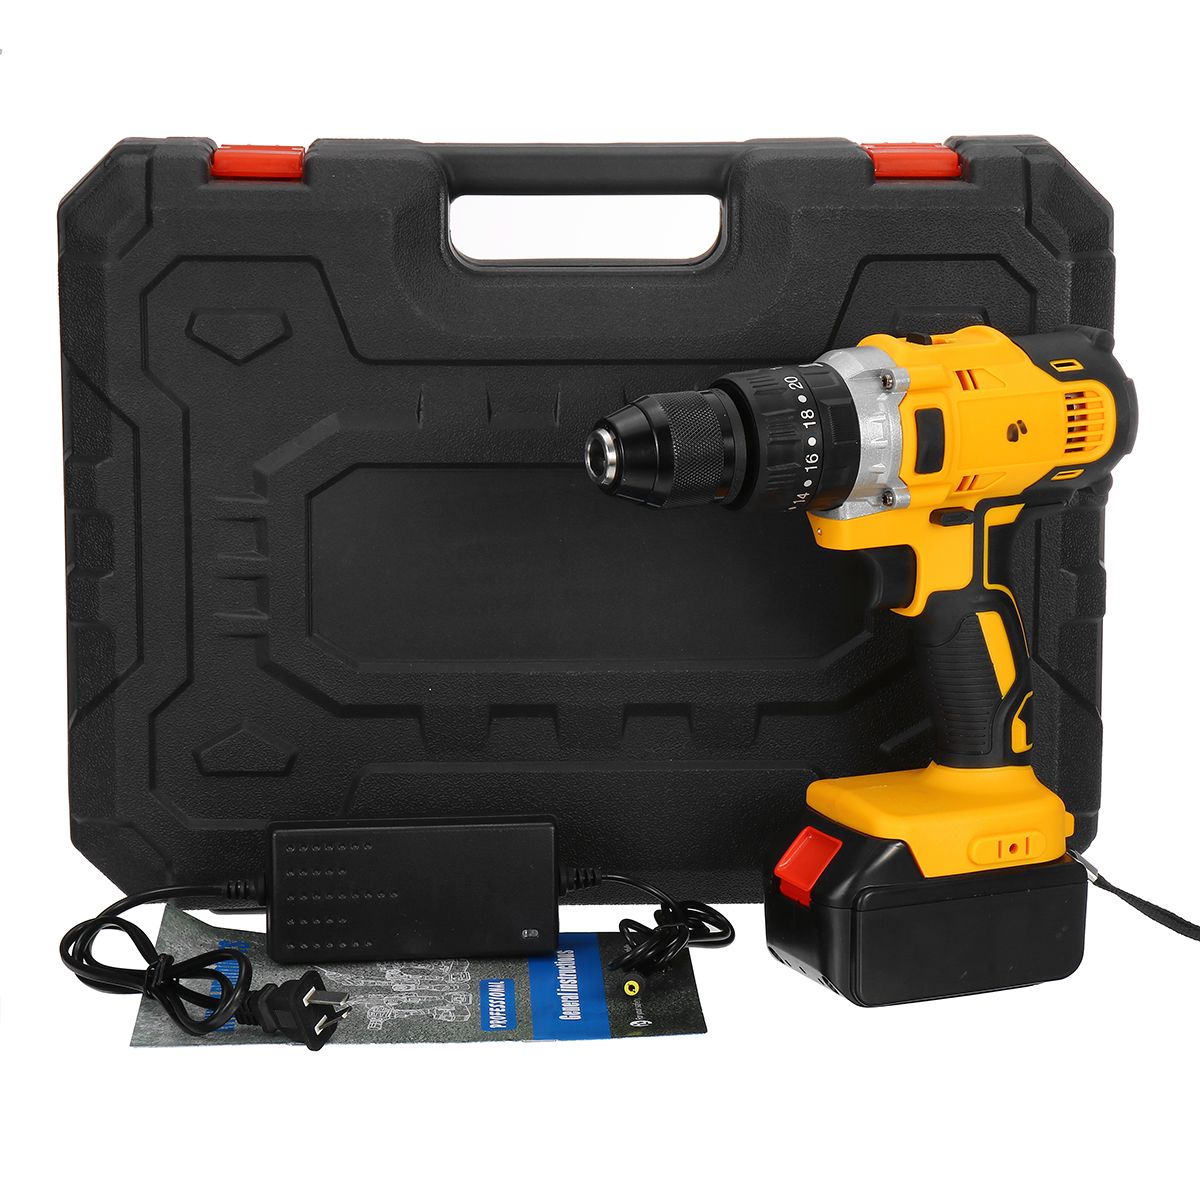 100-240V-AC-36V-3-In-1-Cordless-150Nm-Torque-Impact-Drill-Screwdriver-Wrench-2-Speeds-Adjustment-LED-1631481